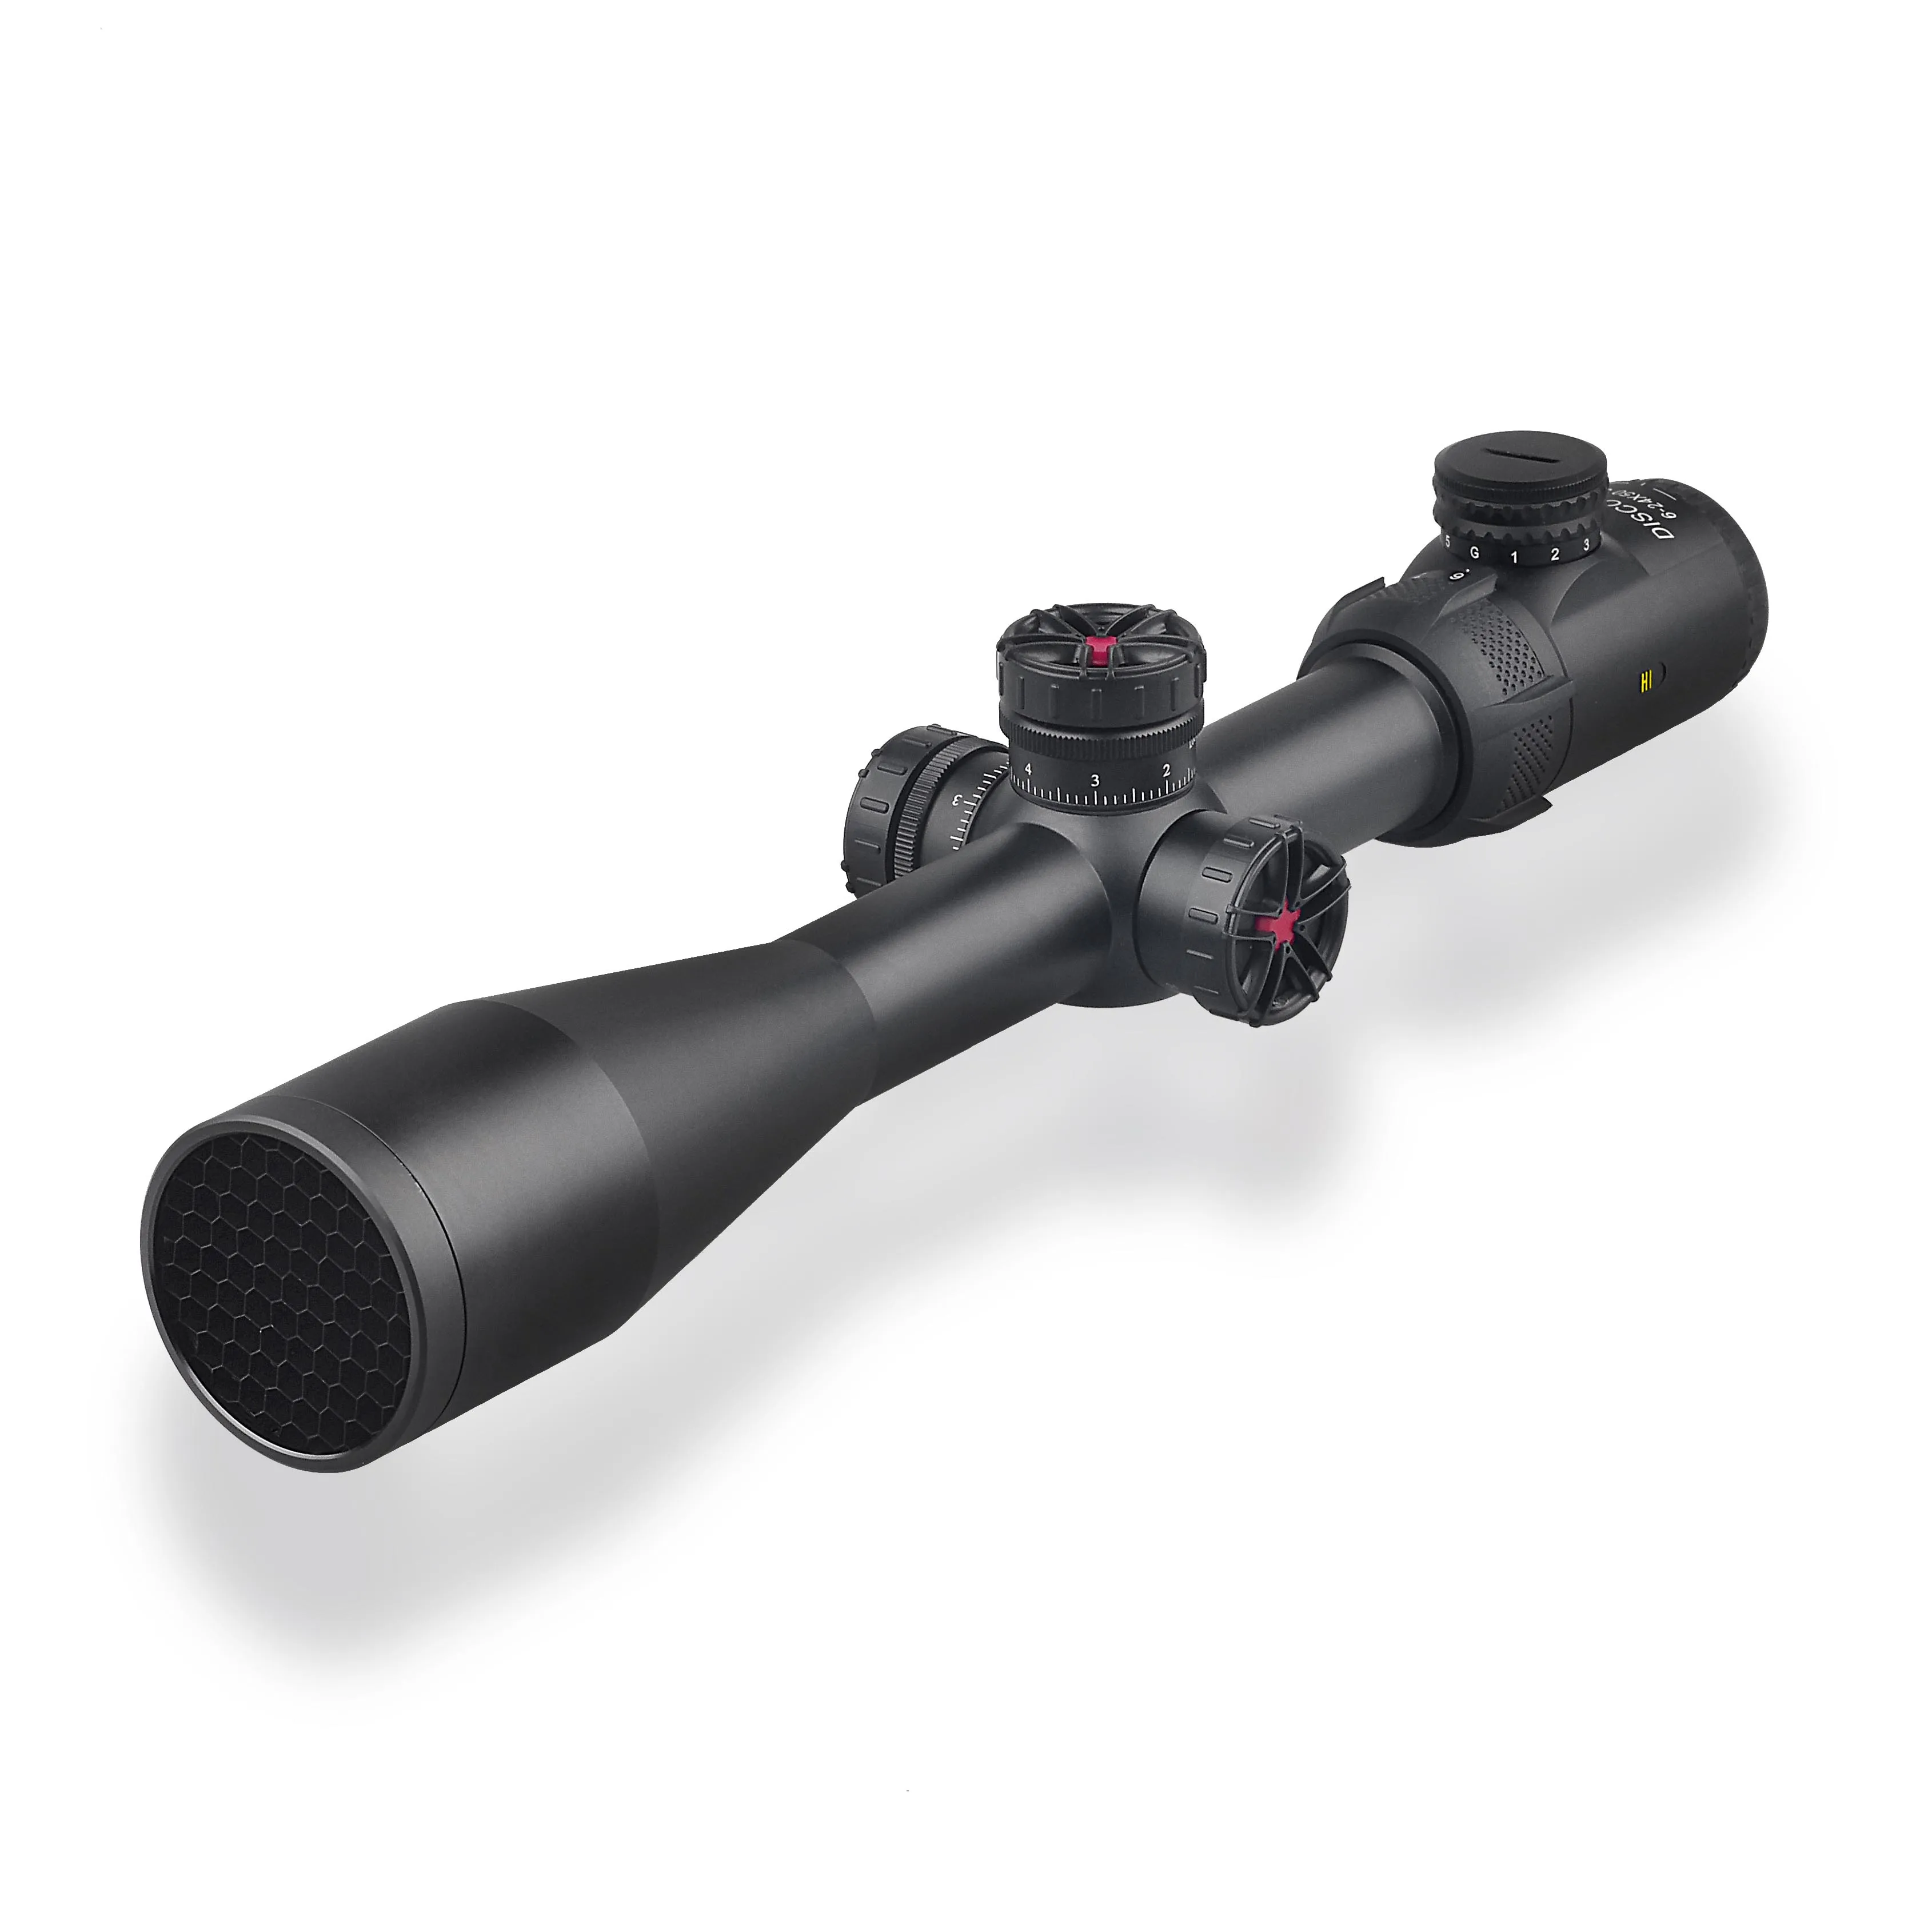 

Discovery Scope HI 6-24X50 SFIR Second Focal Plane Riflescope for Shooting and Hunting with Zero Stop